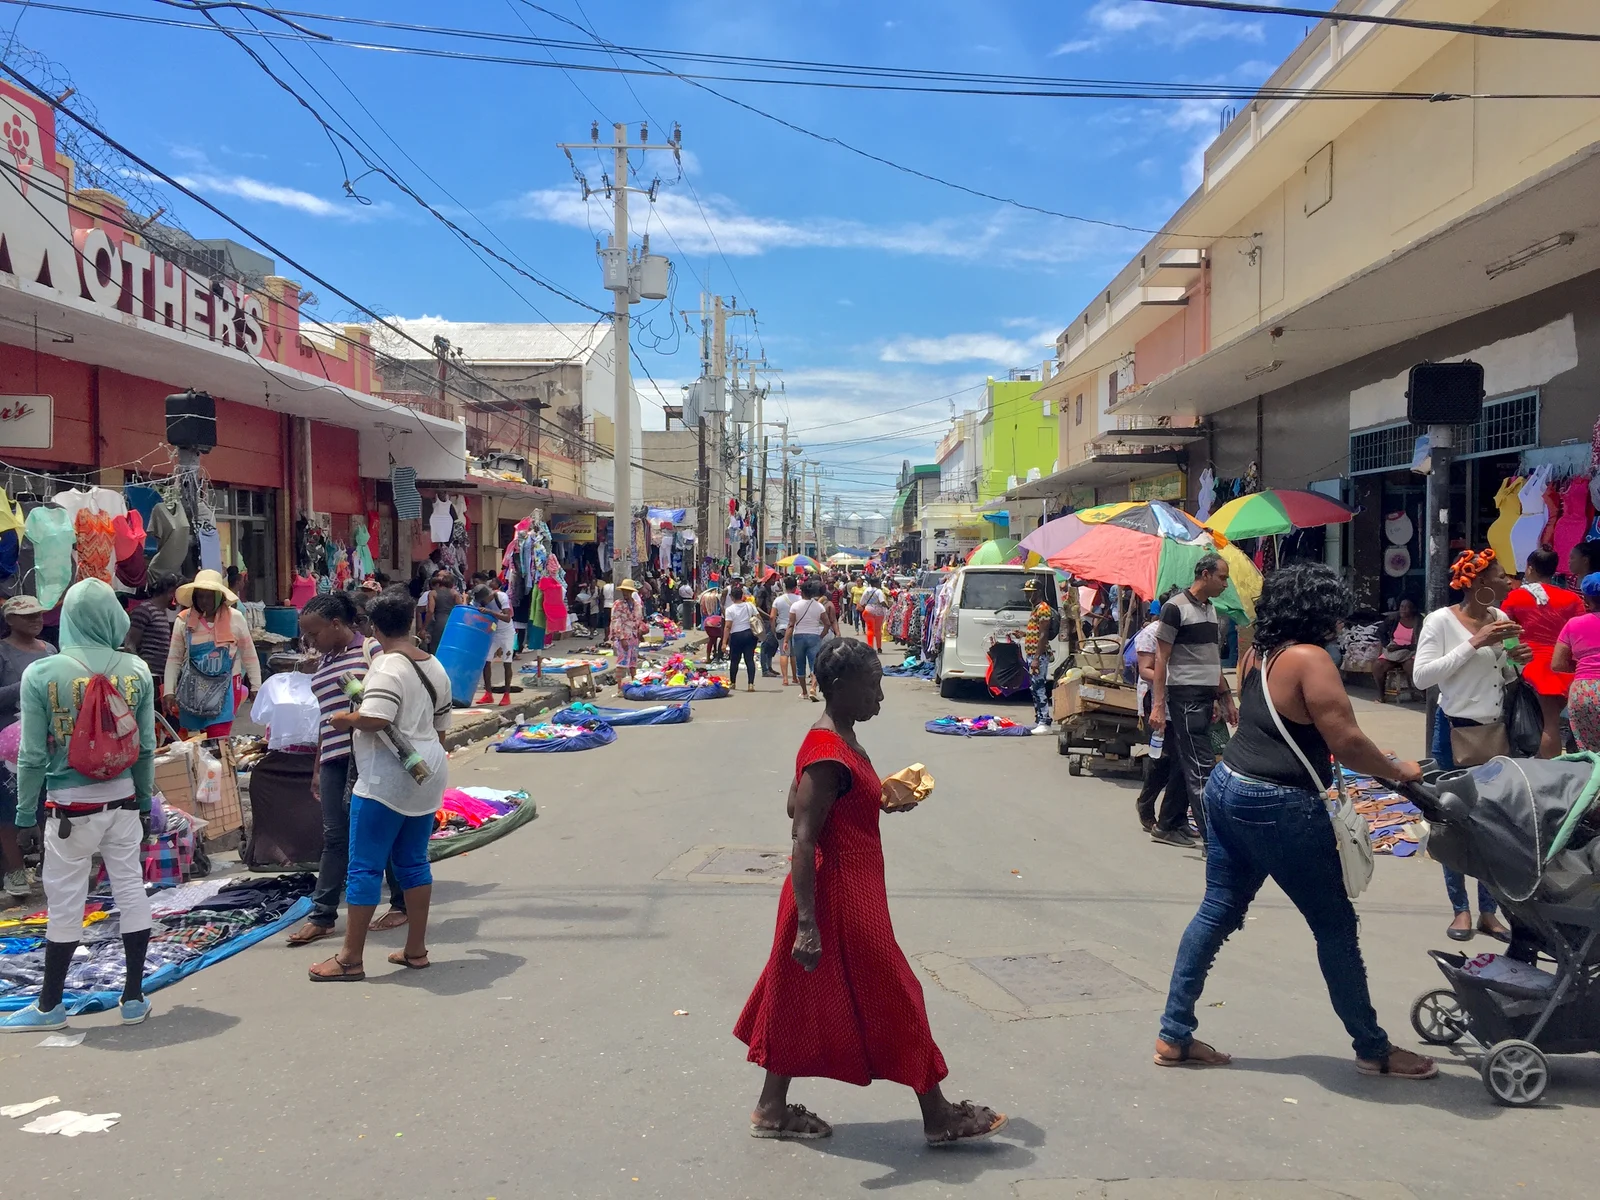 Market in Kingston with people walking about for a piece on the best time to visit Jamaica